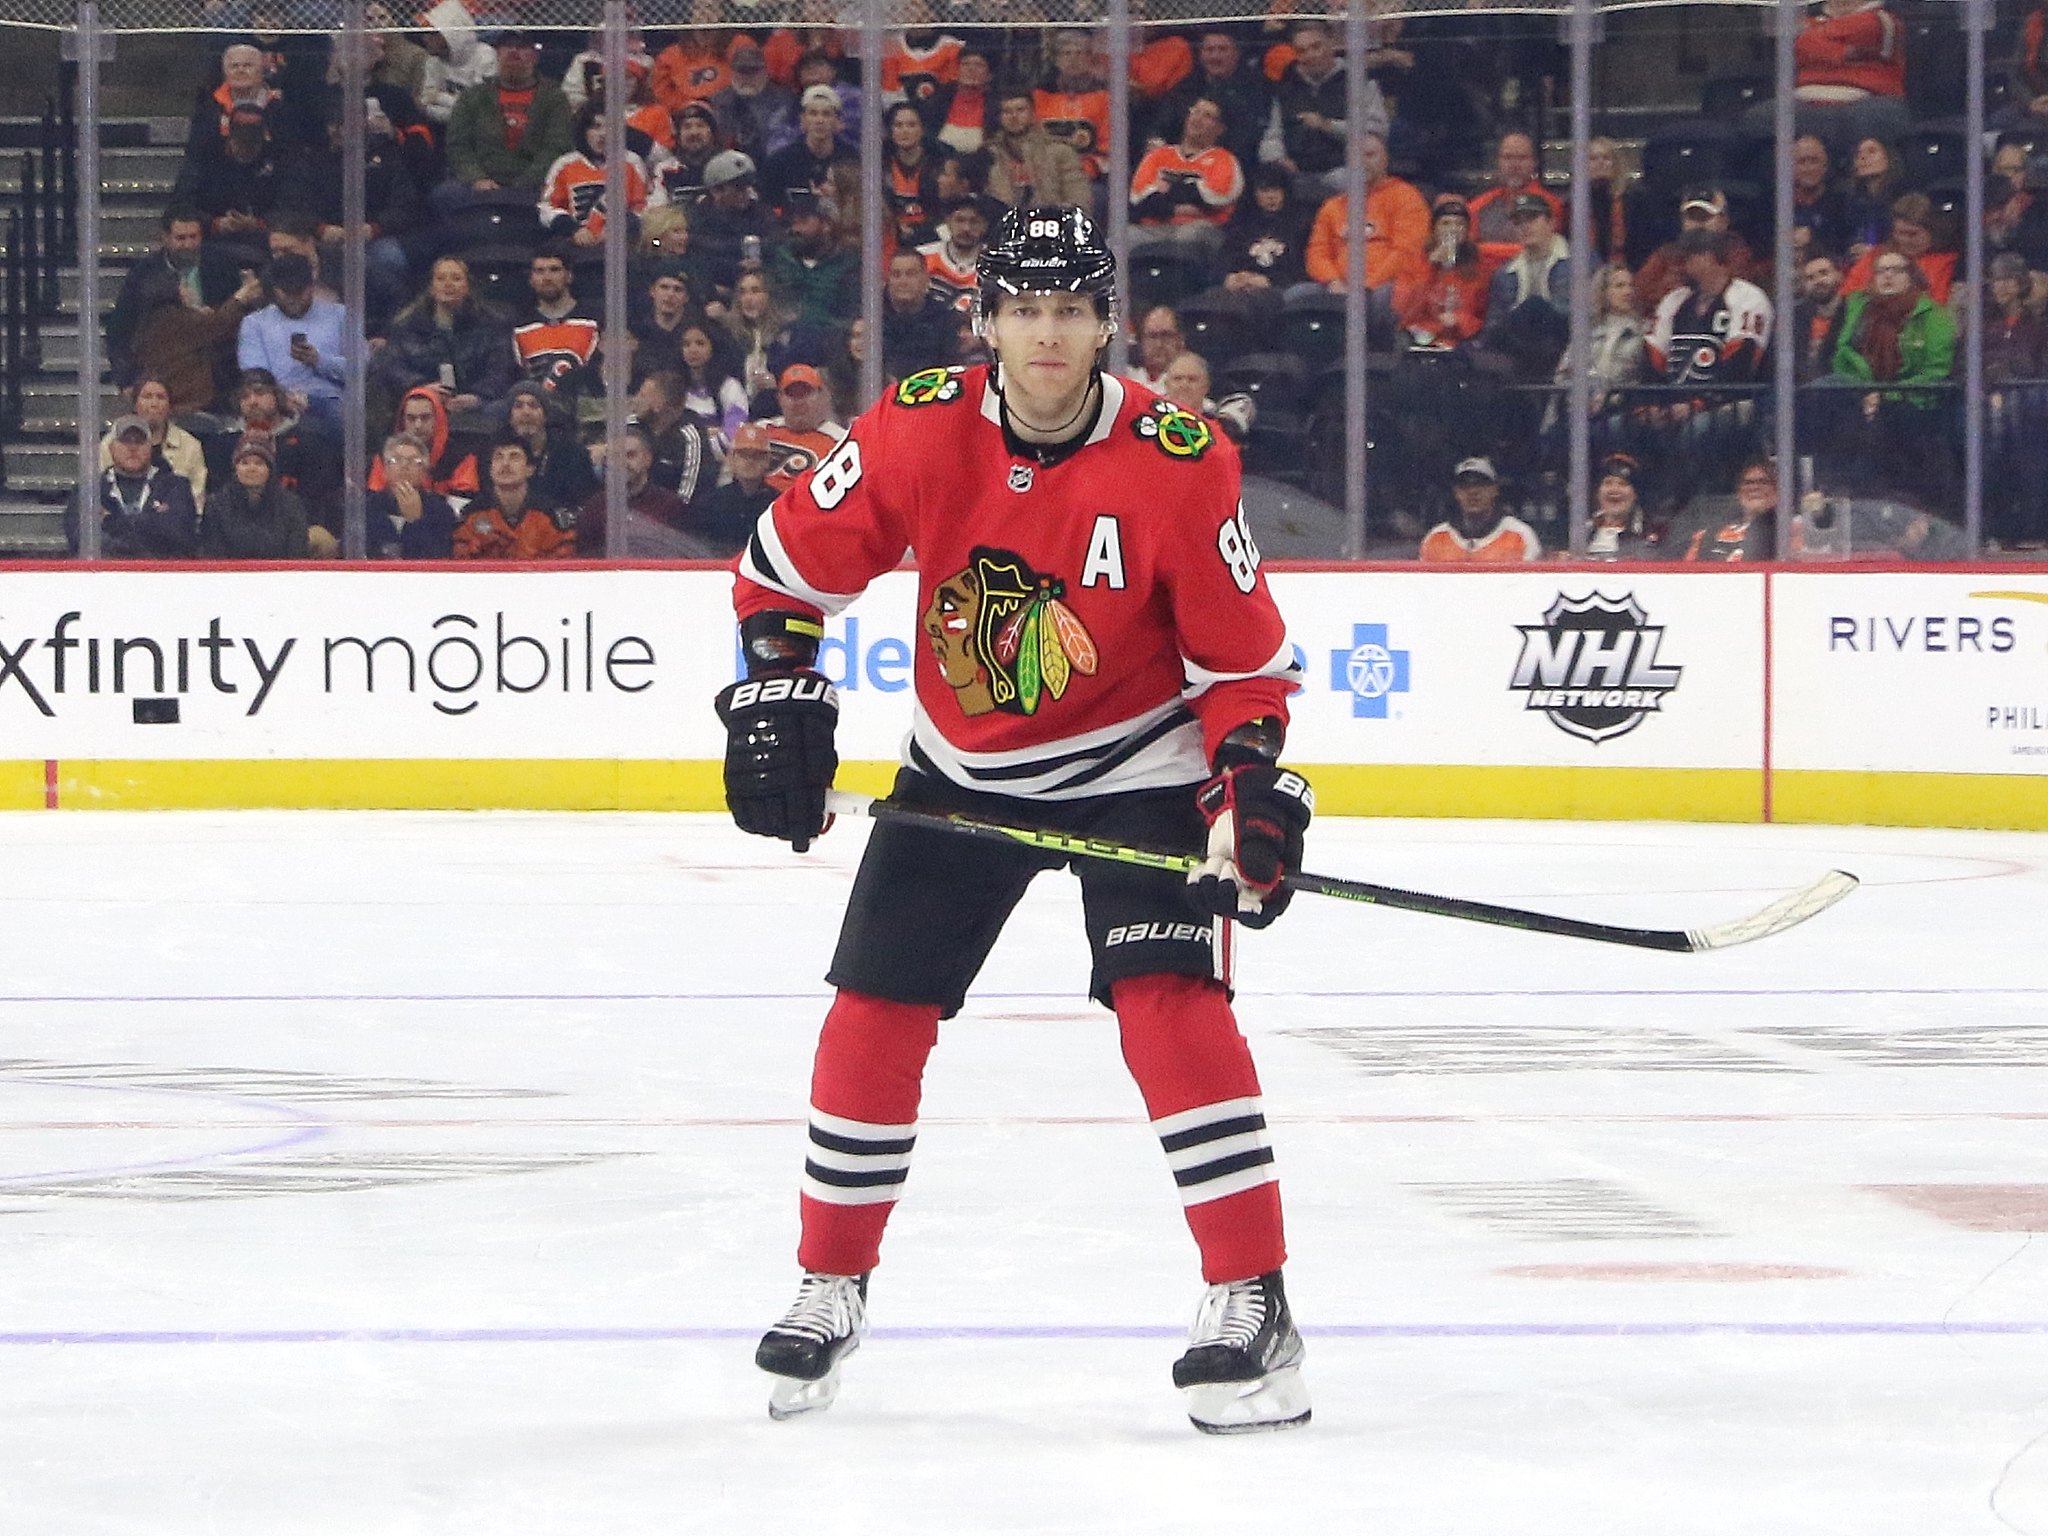 Patrick Kane has been linked to the Detroit Red Wings